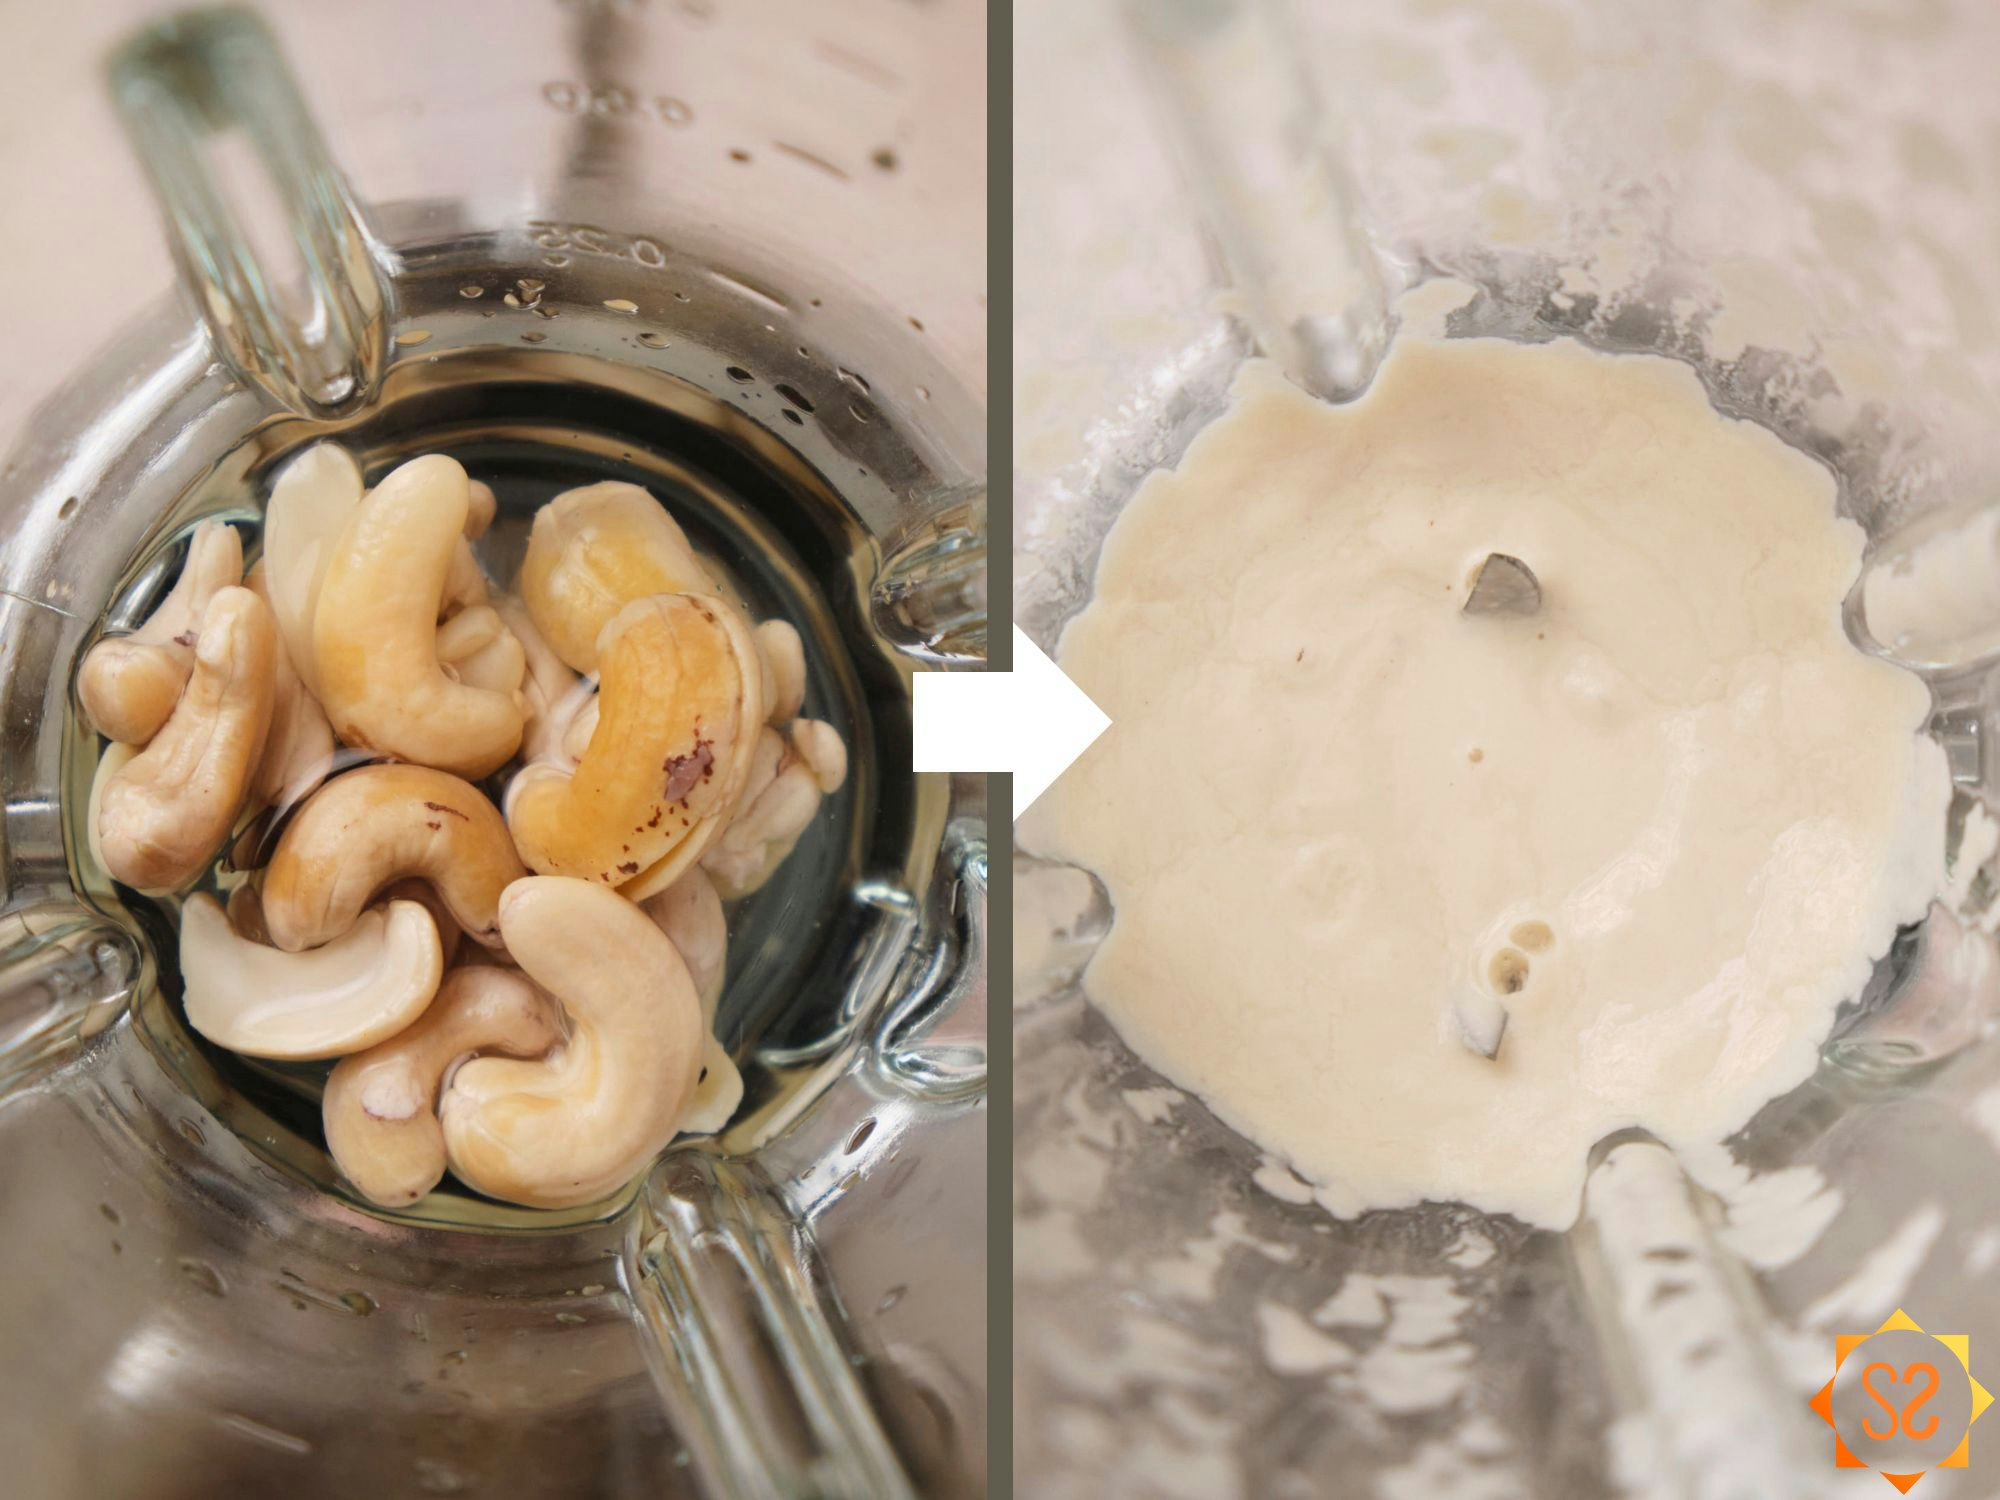 Left: cashews and water in a blender; Right: cashew cream in a blender after cashews and water have been blended.